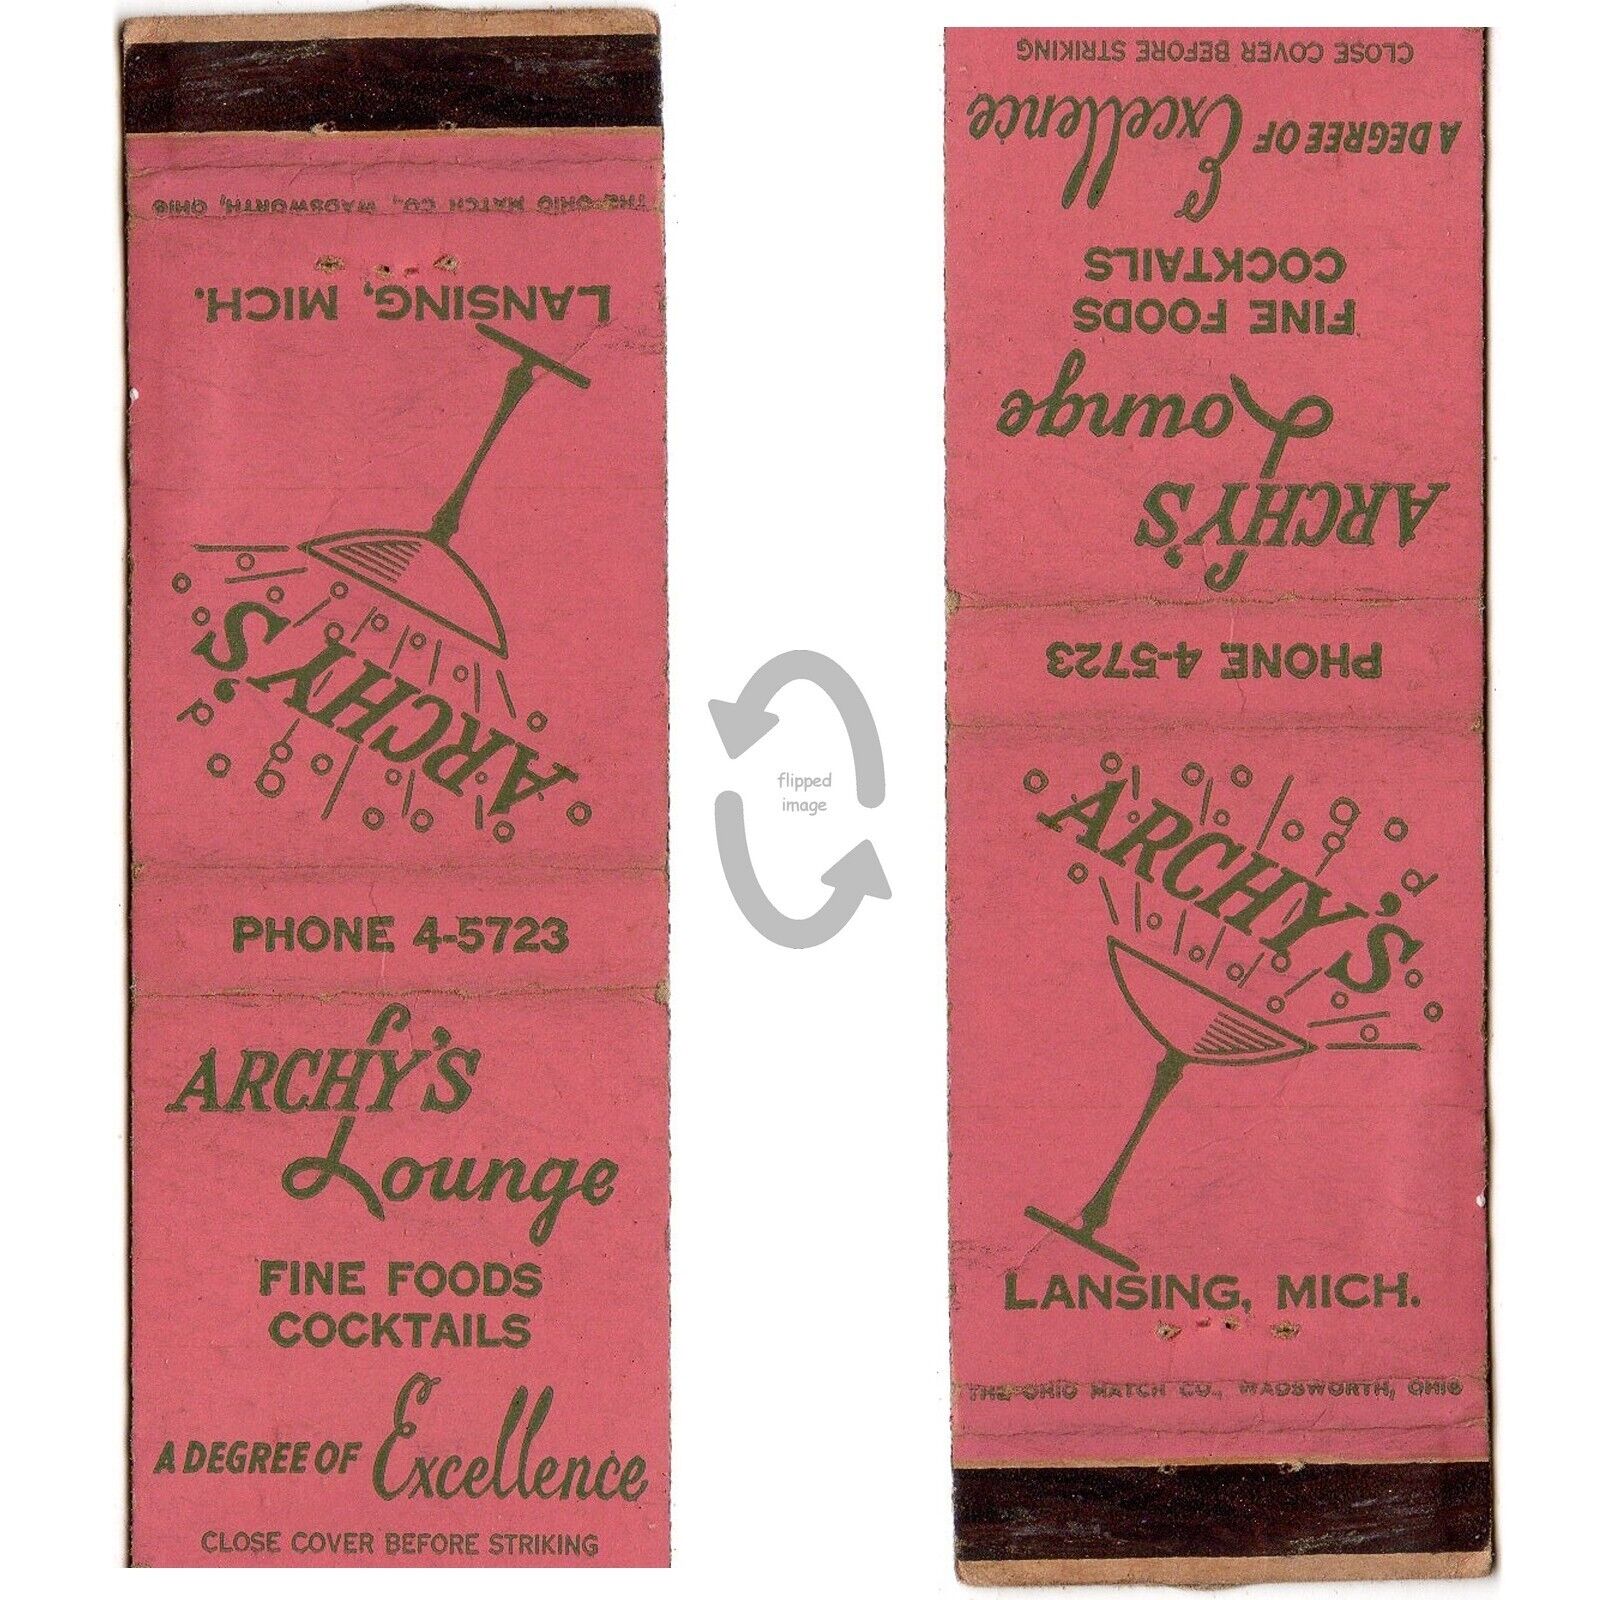 Vintage Matchbook CoverArchy's Lounge Bar Lansing Michigan 1950s Champagne glass